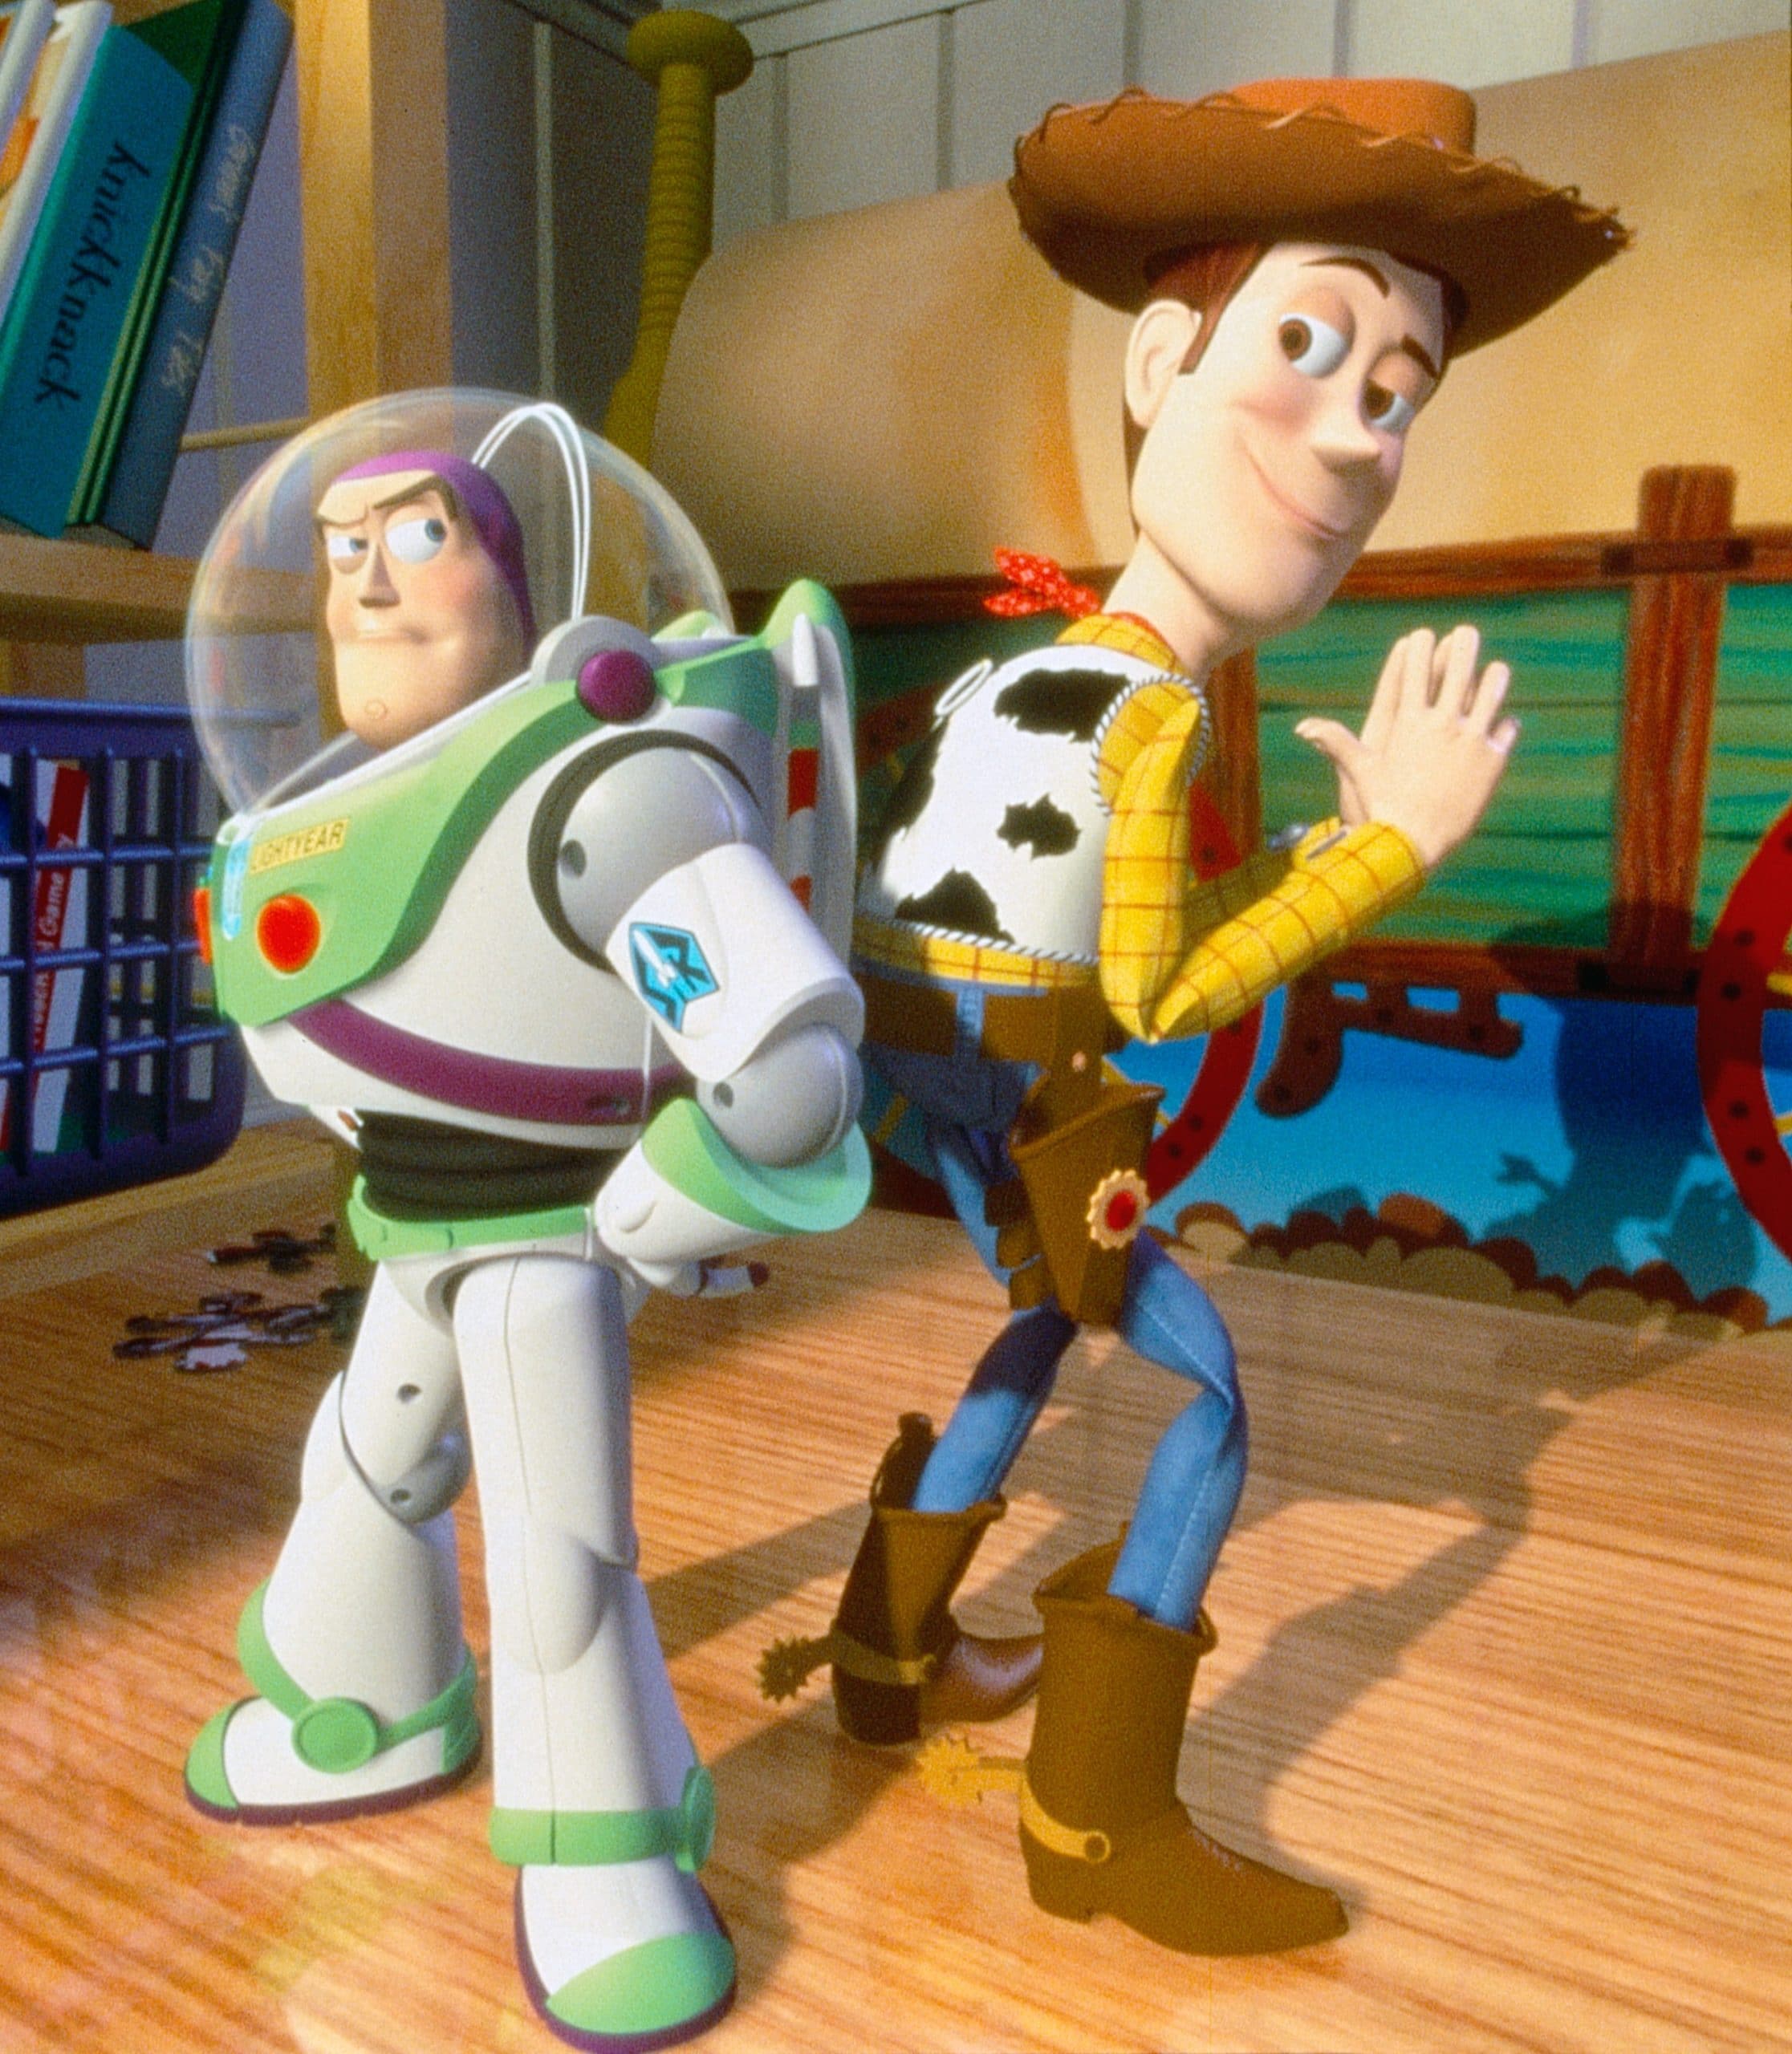 TOY STORY, from left: Buzz Lightyear (voice: Tim Allen), Woody (voice: Tom Hanks), 1995